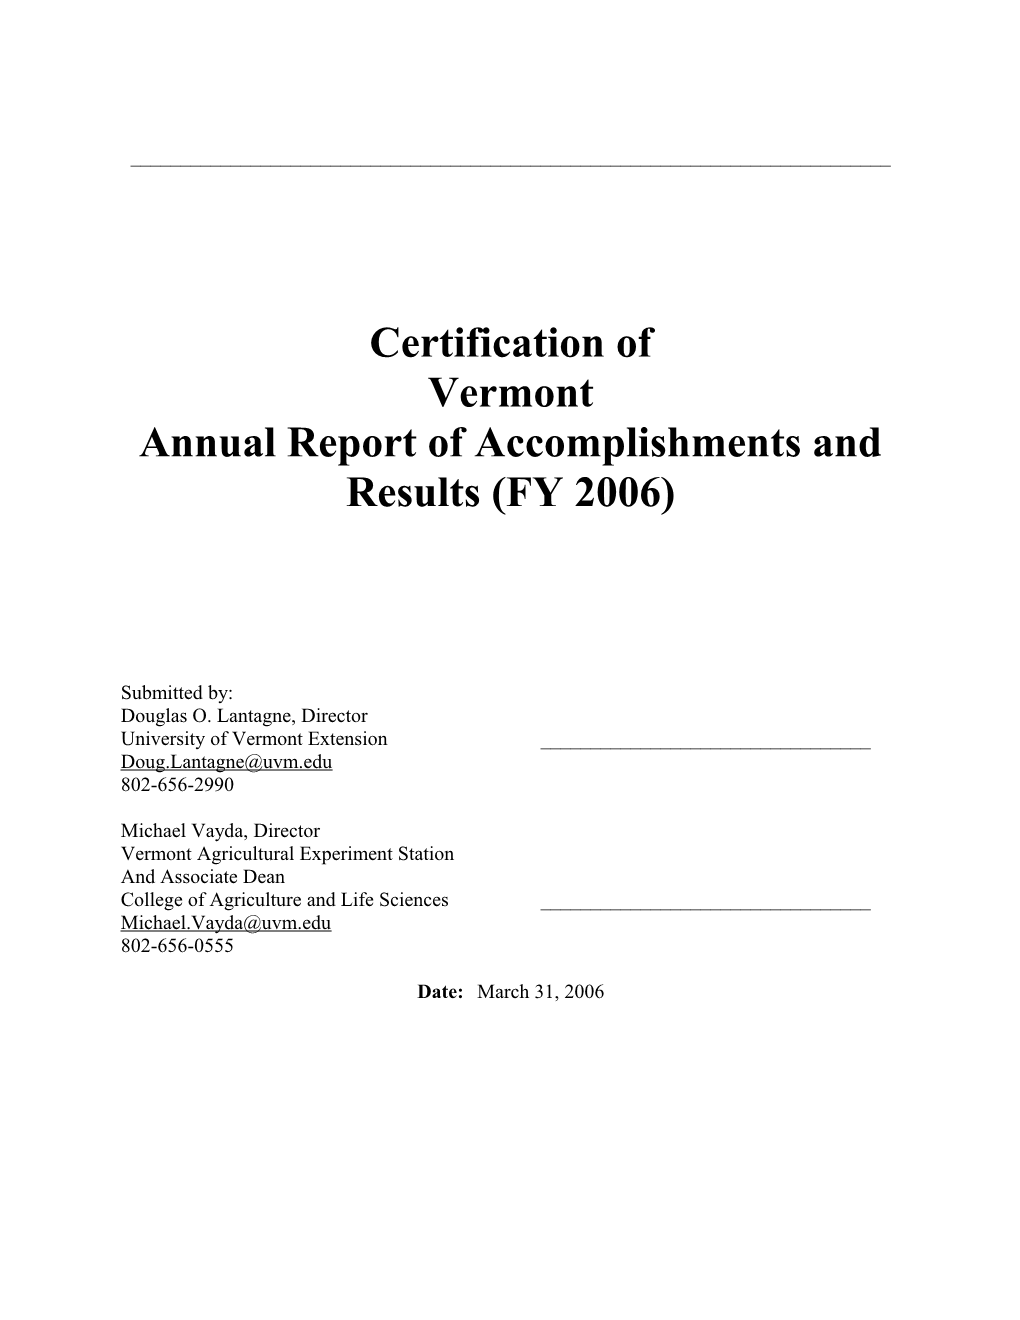 Annual Report of Accomplishments and Results (FY 2006)